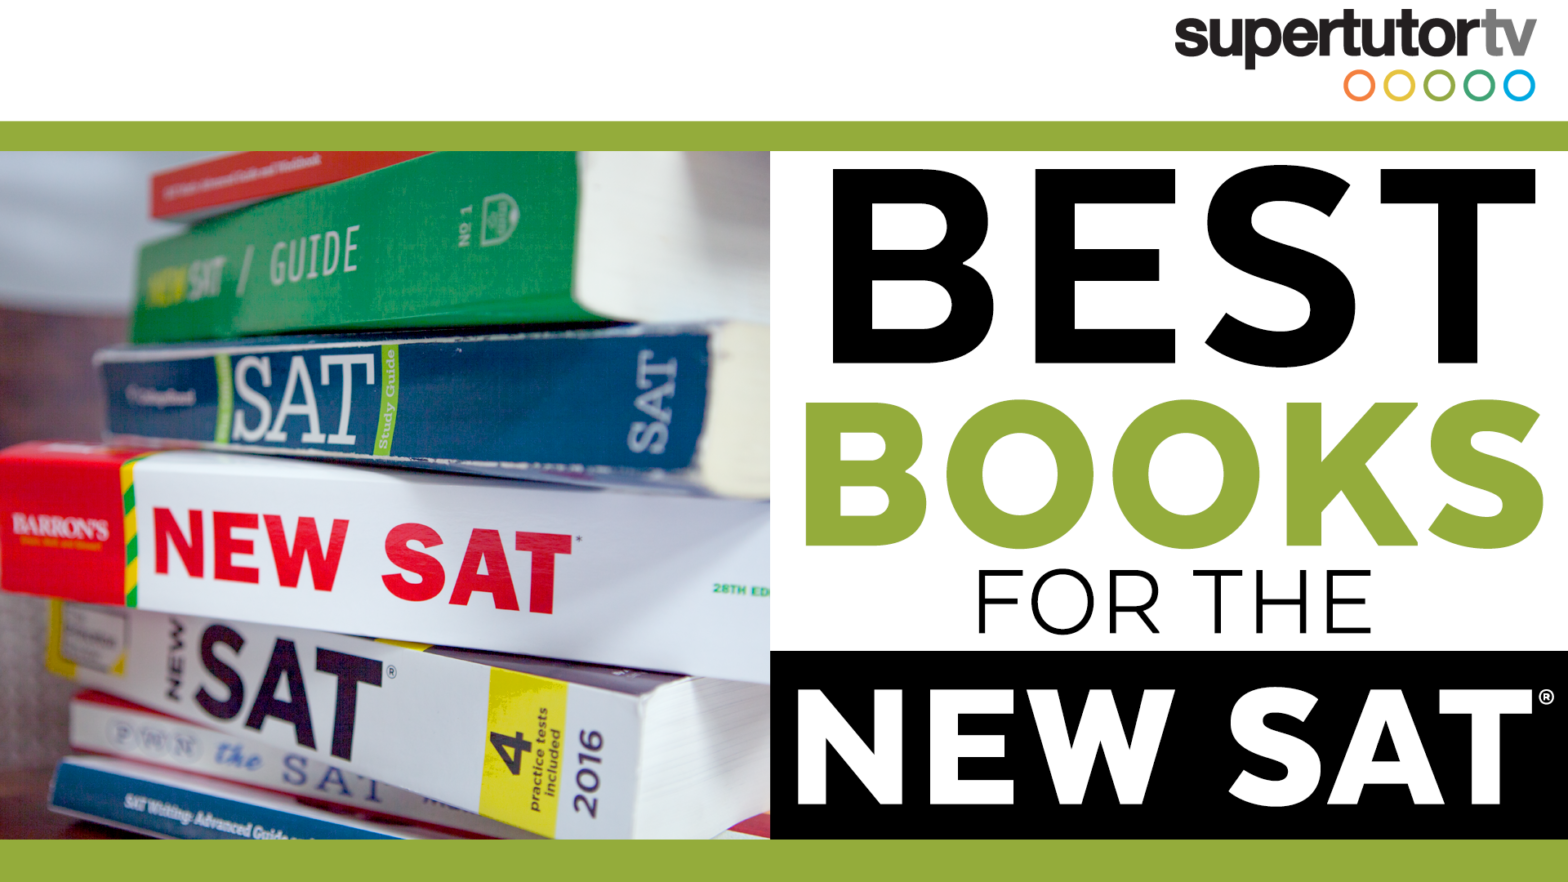 Best Books for The New SAT®